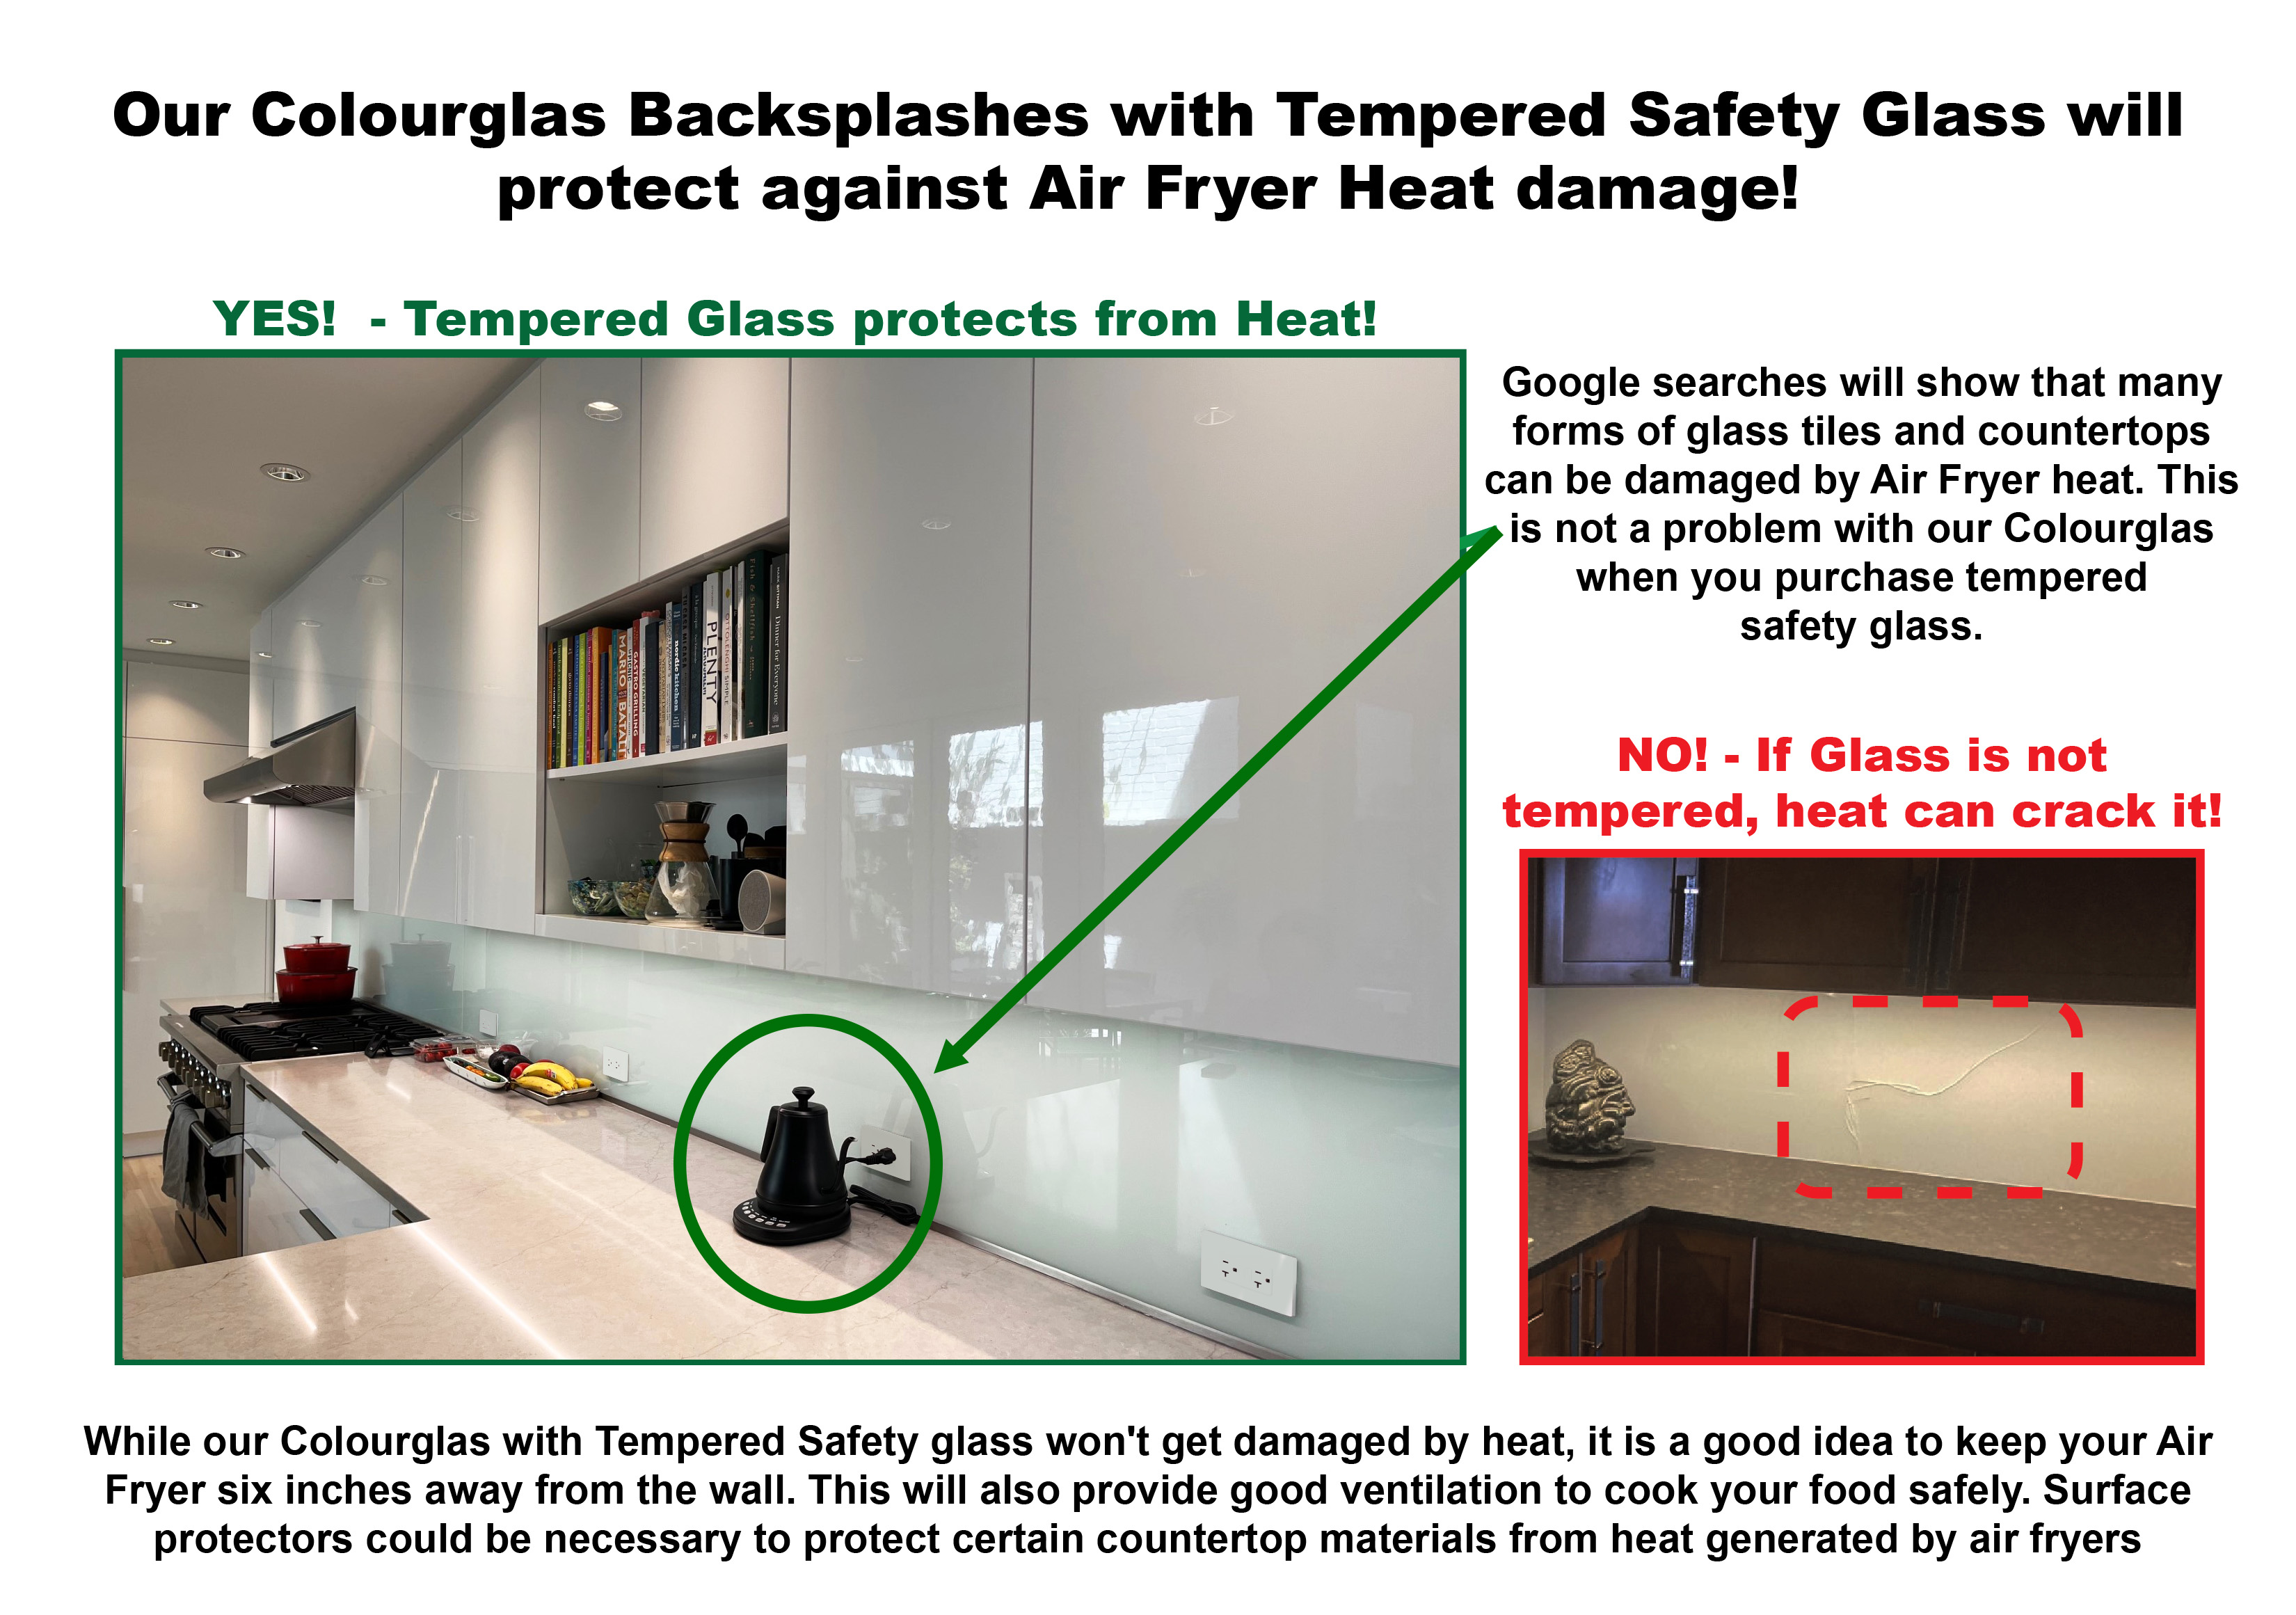 Our Colourglas Backsplashes with Tempered Safety Glass will 
protect against Air Fryer Heat damage!